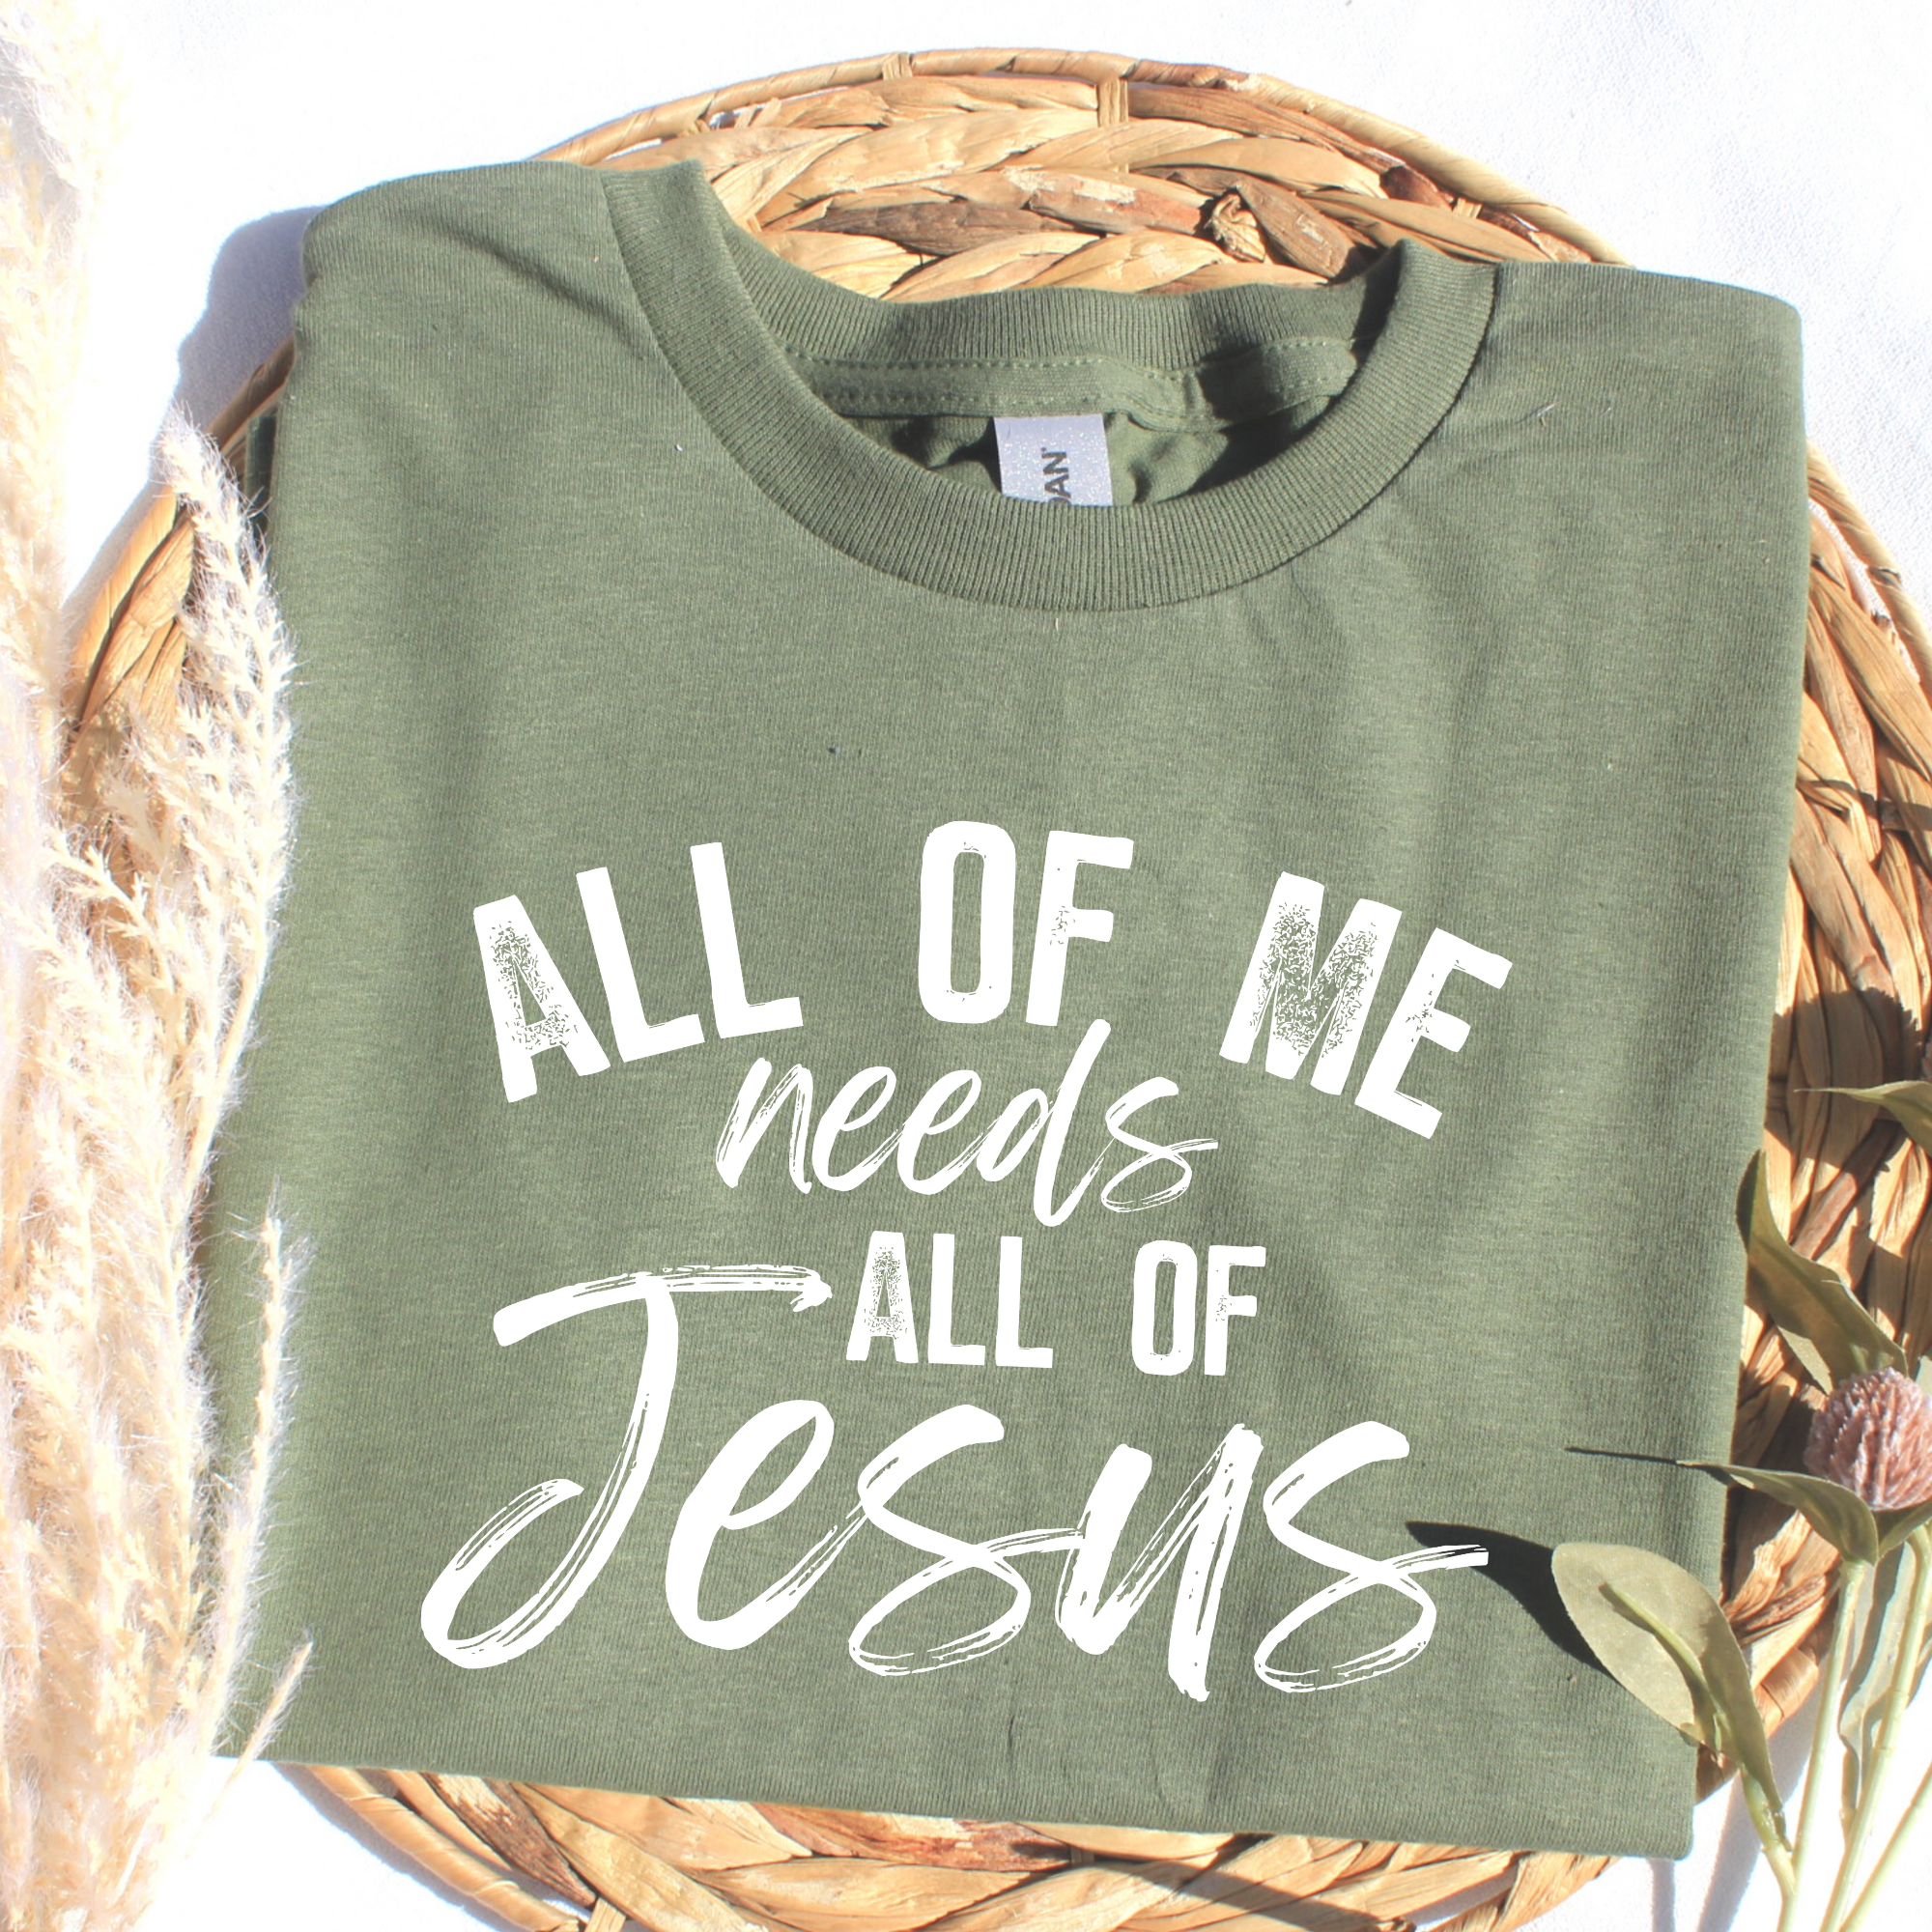 All of me needs all of Jesus- white font